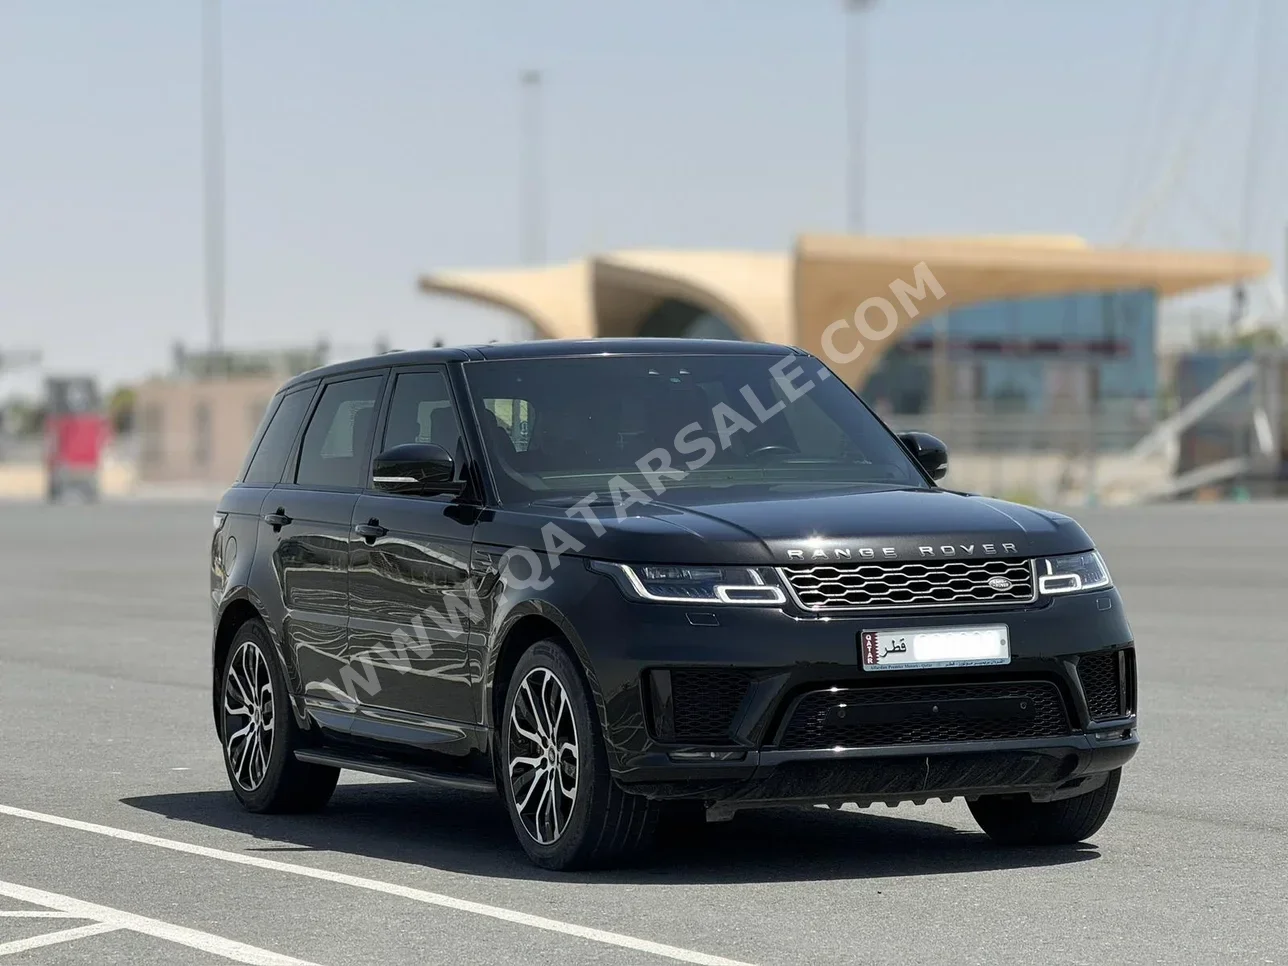 Land Rover  Range Rover  Sport HSE  2020  Automatic  95,000 Km  6 Cylinder  Four Wheel Drive (4WD)  SUV  Black  With Warranty